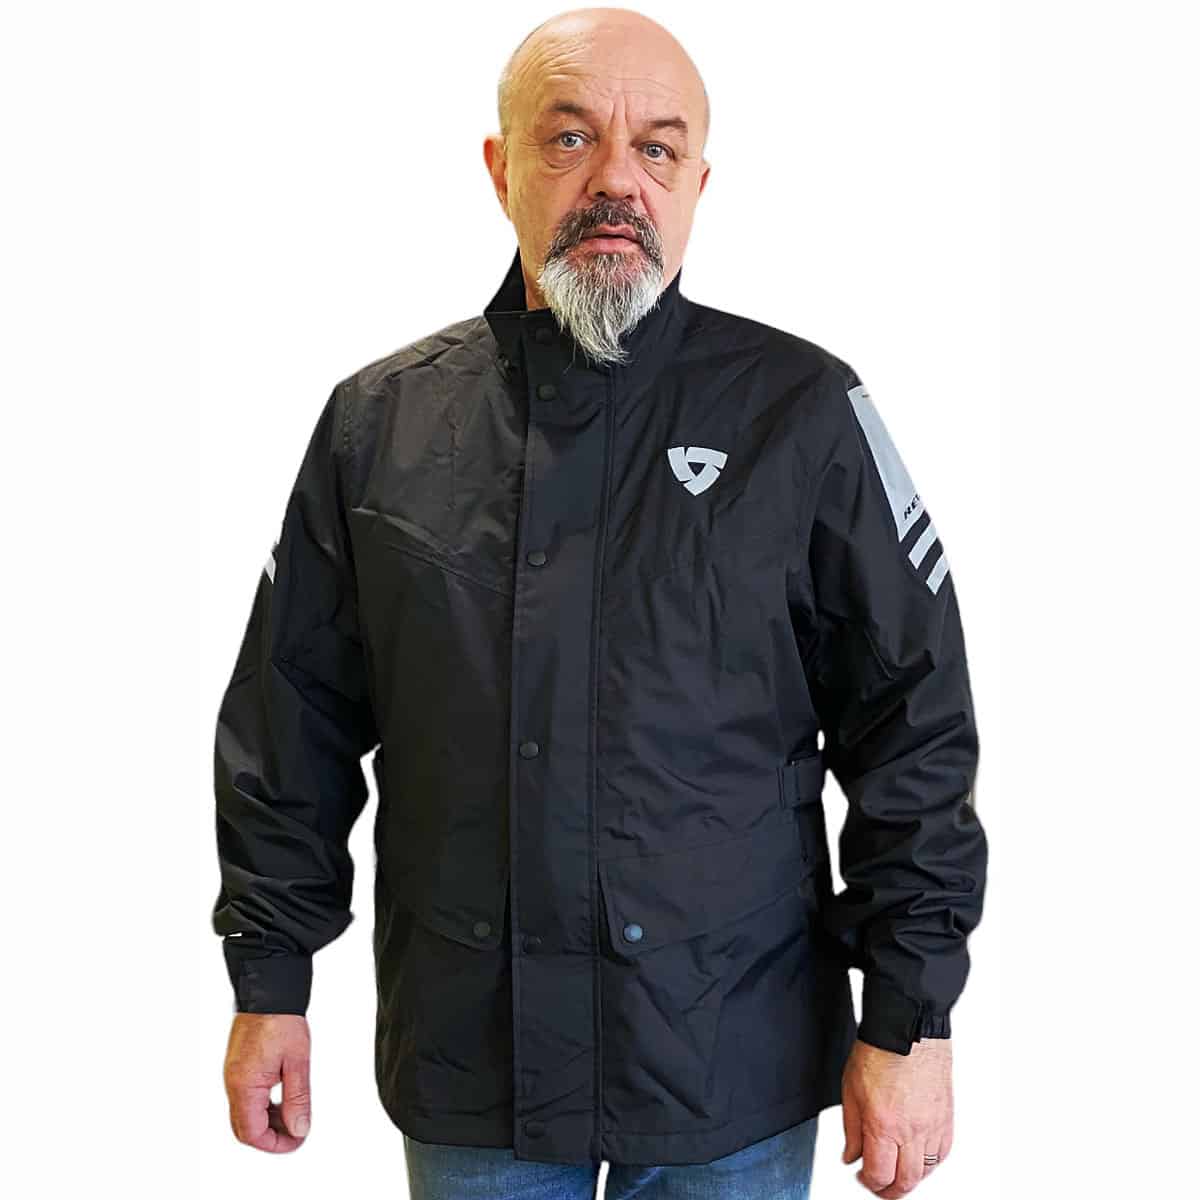 Rev It! Nitric 4 Rain Over Jacket: 100% waterproof protection with a mesh lining for comfort